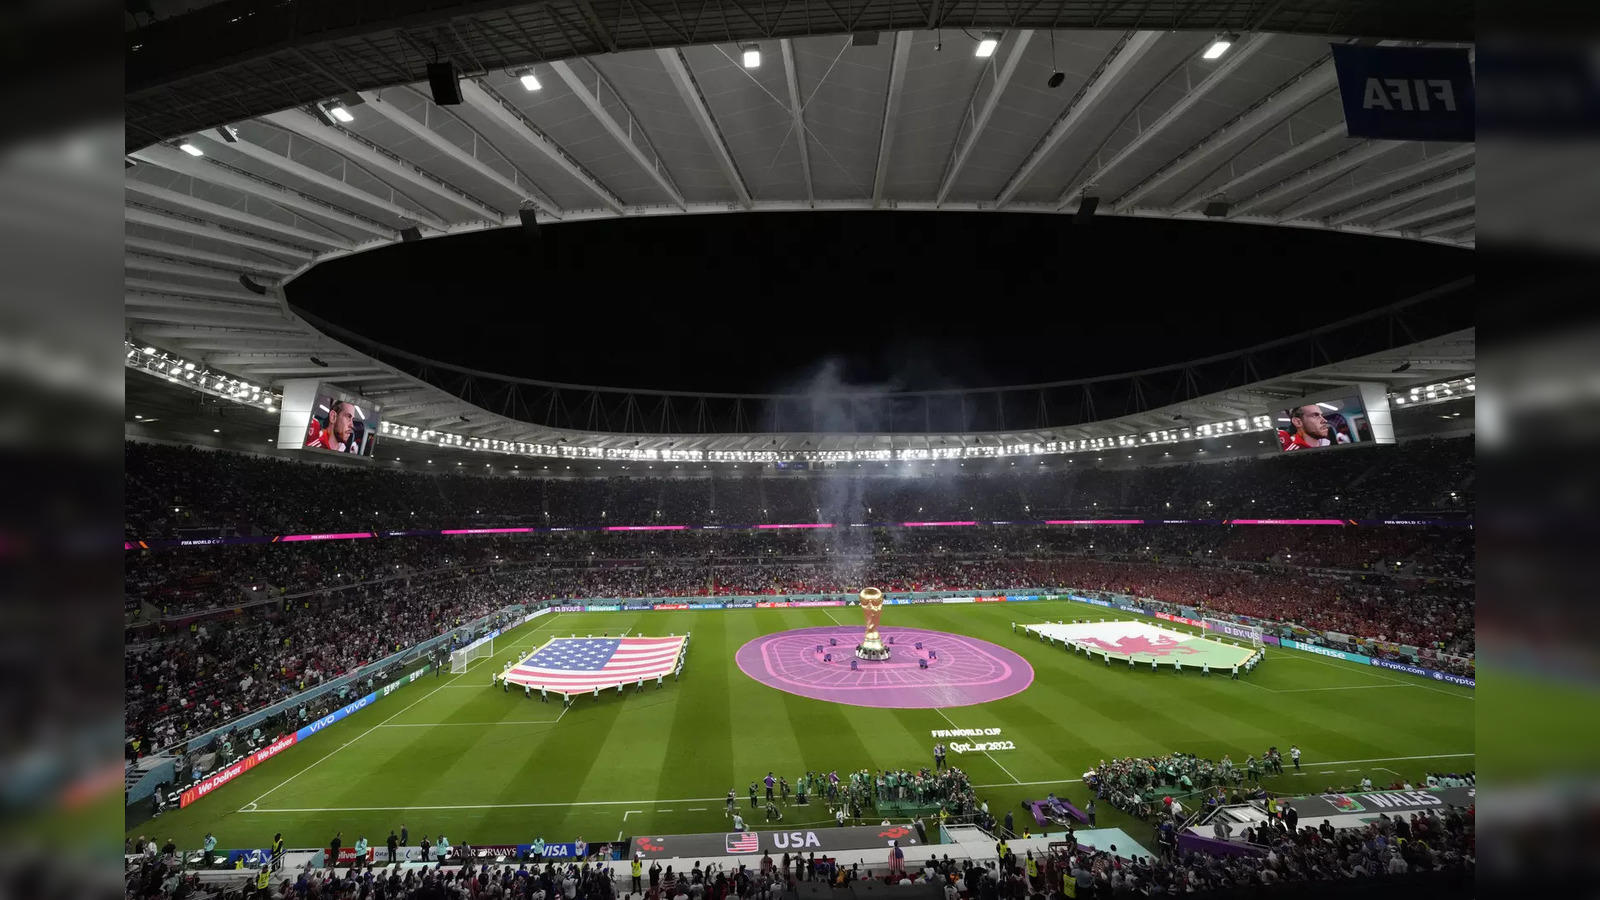 Building the World Cup: An in-depth look at Russia's stadia